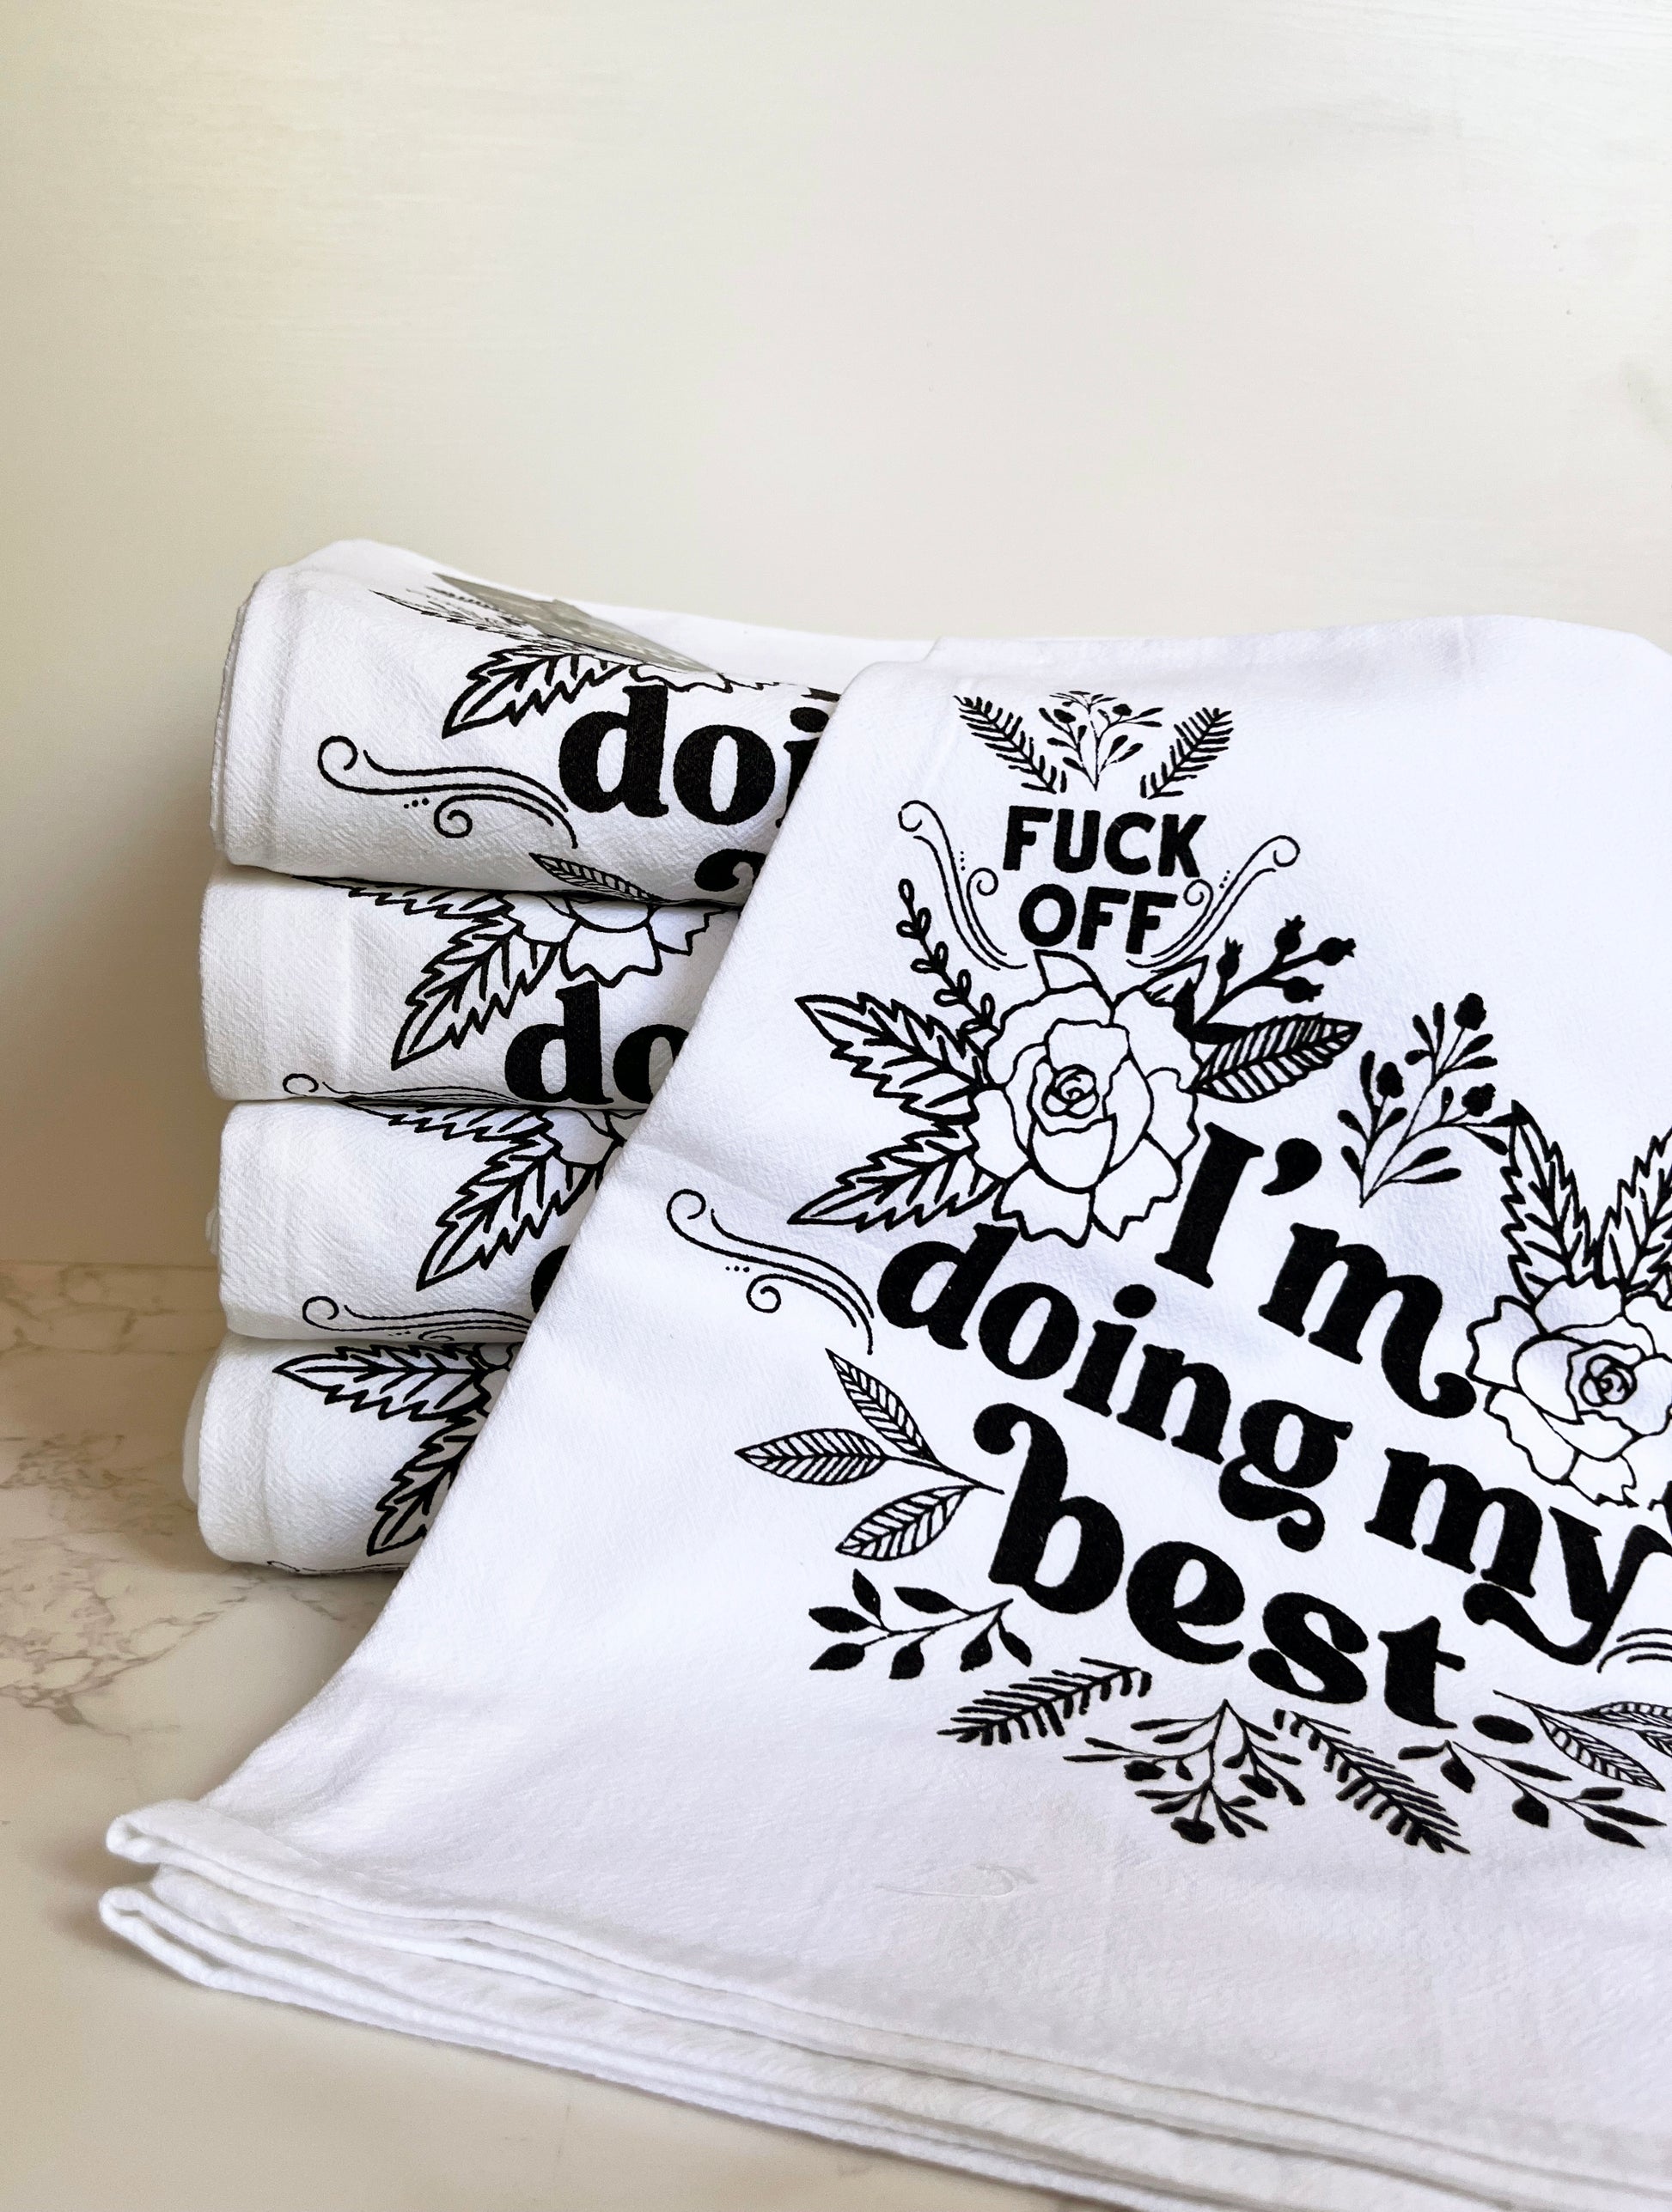 fuck off im doing my best funny dish towel screen print black white retro floral design snarky home decor gifts coin laundry montana